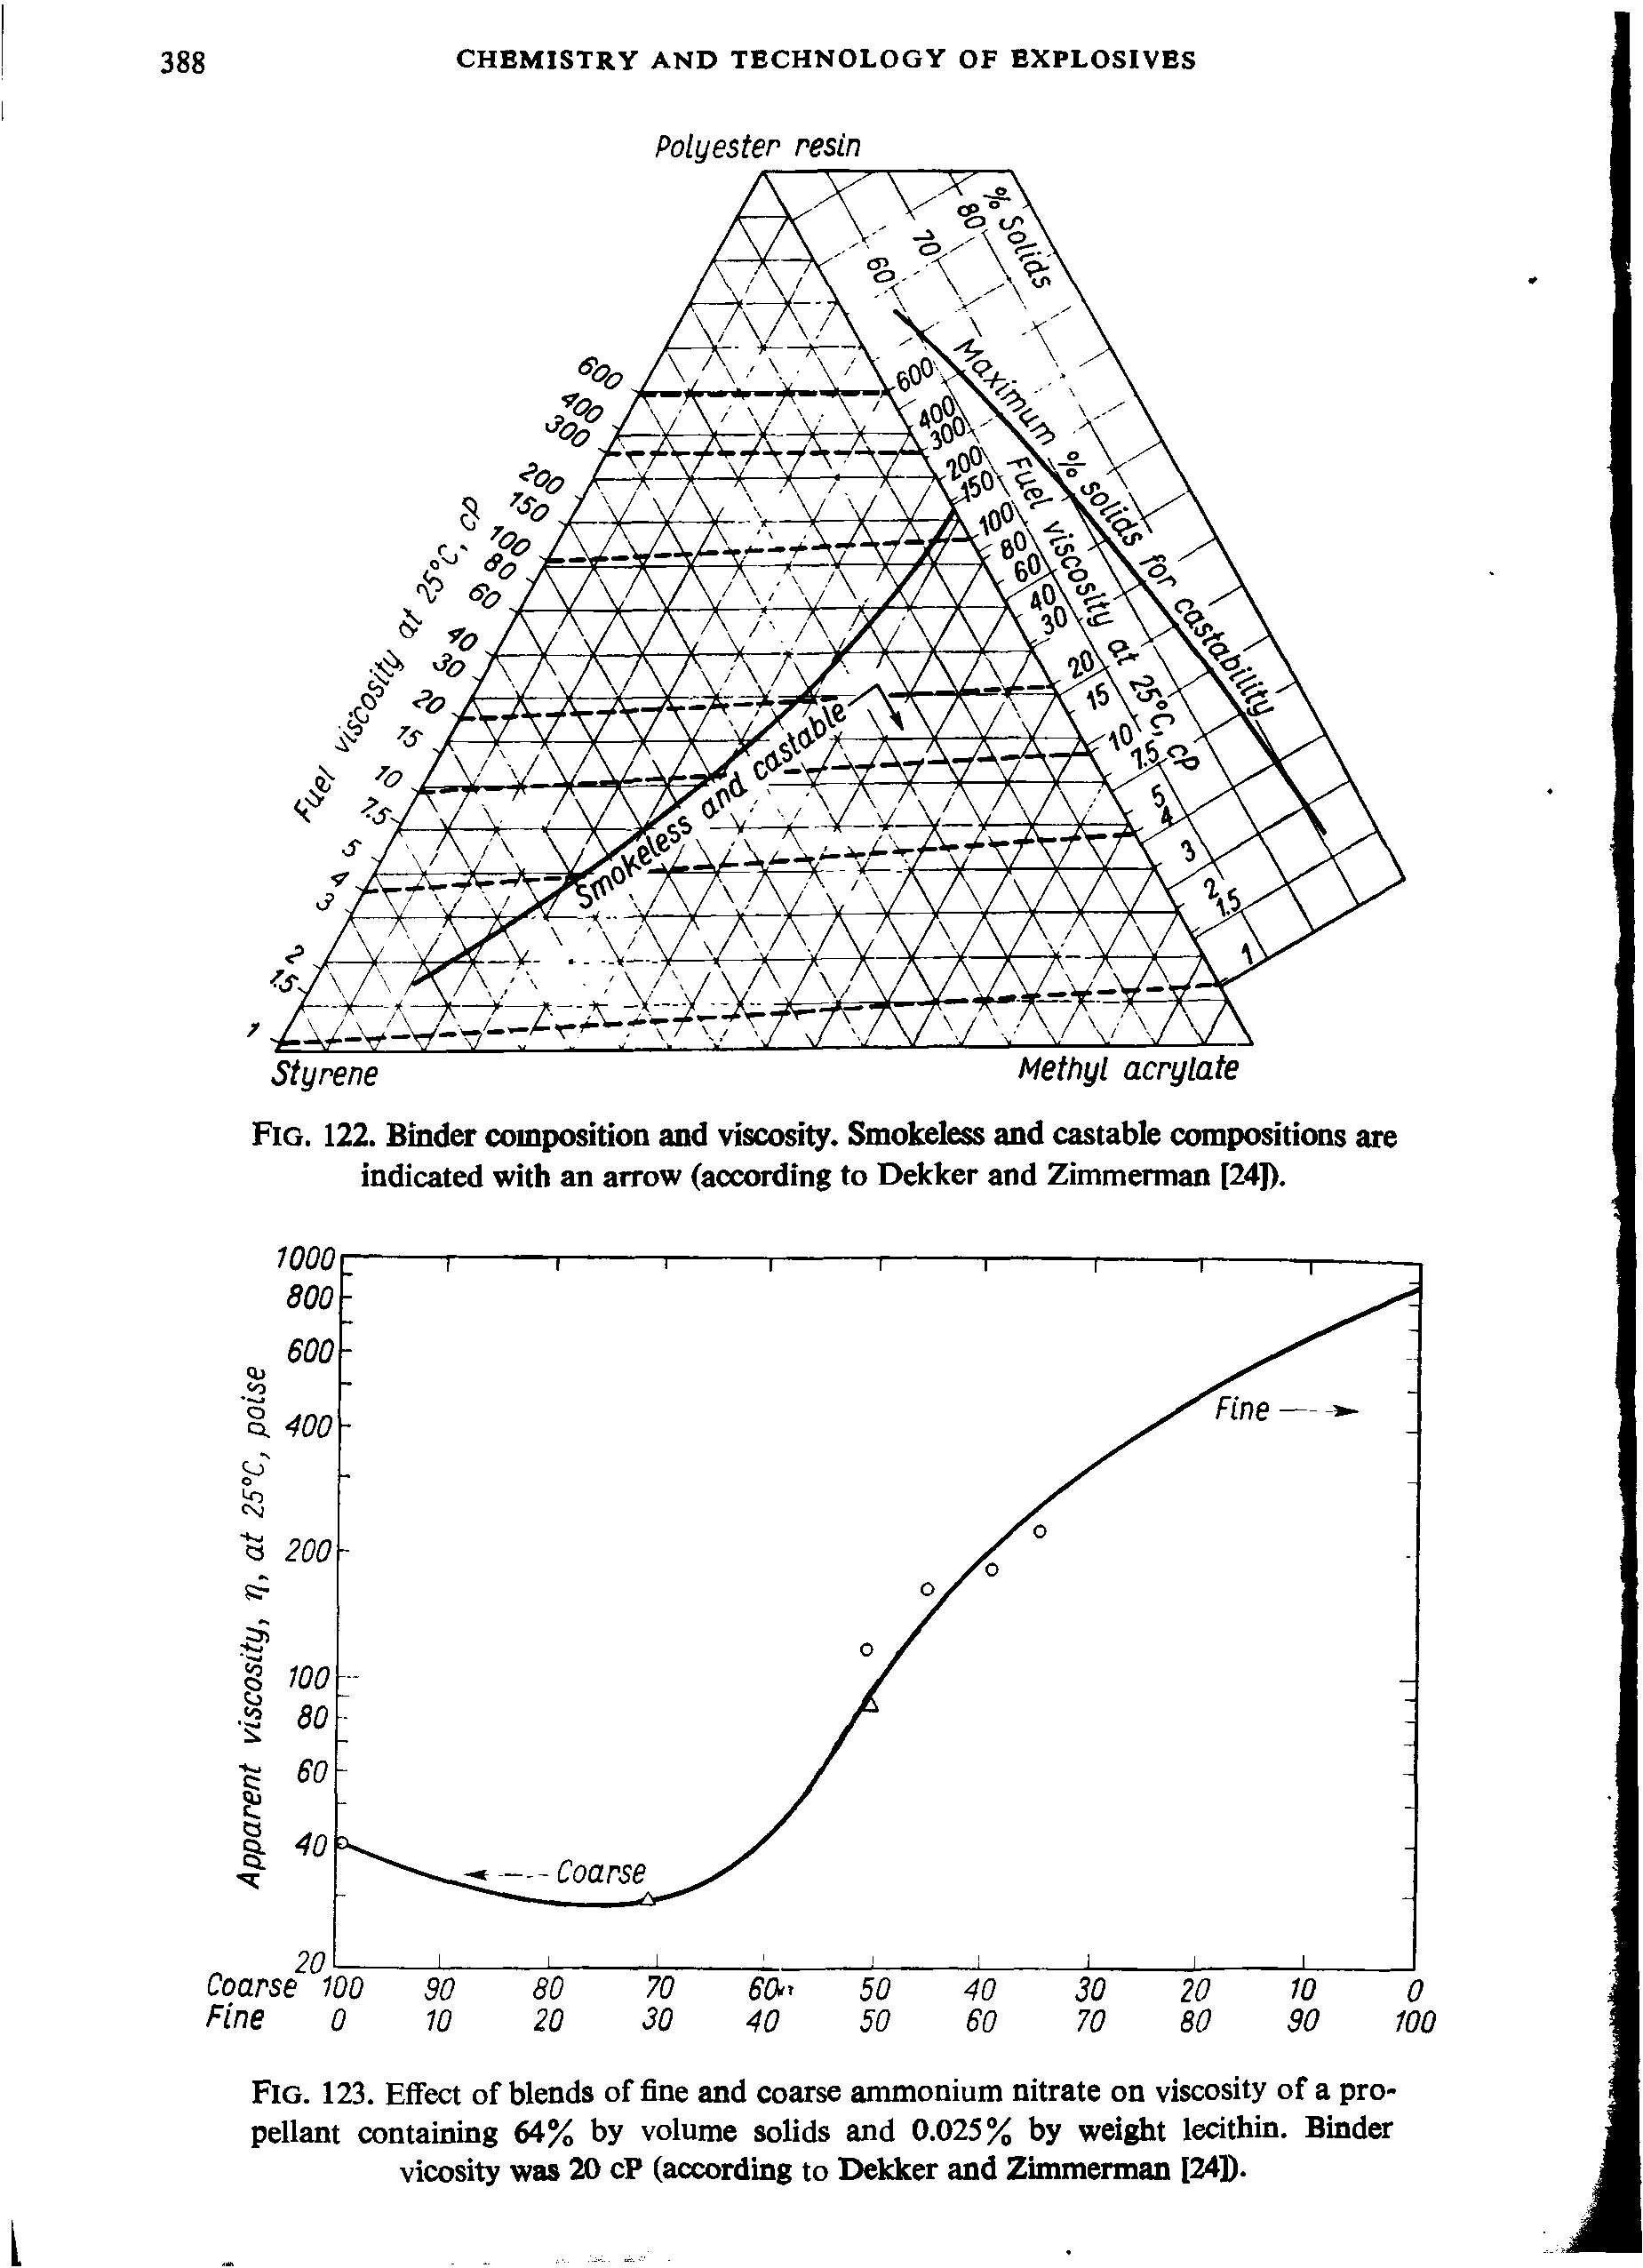 Fig. 122. Binder composition and viscosity. Smokeless and castable compositions are indicated with an arrow (according to Dekker and Zimmerman [24]).